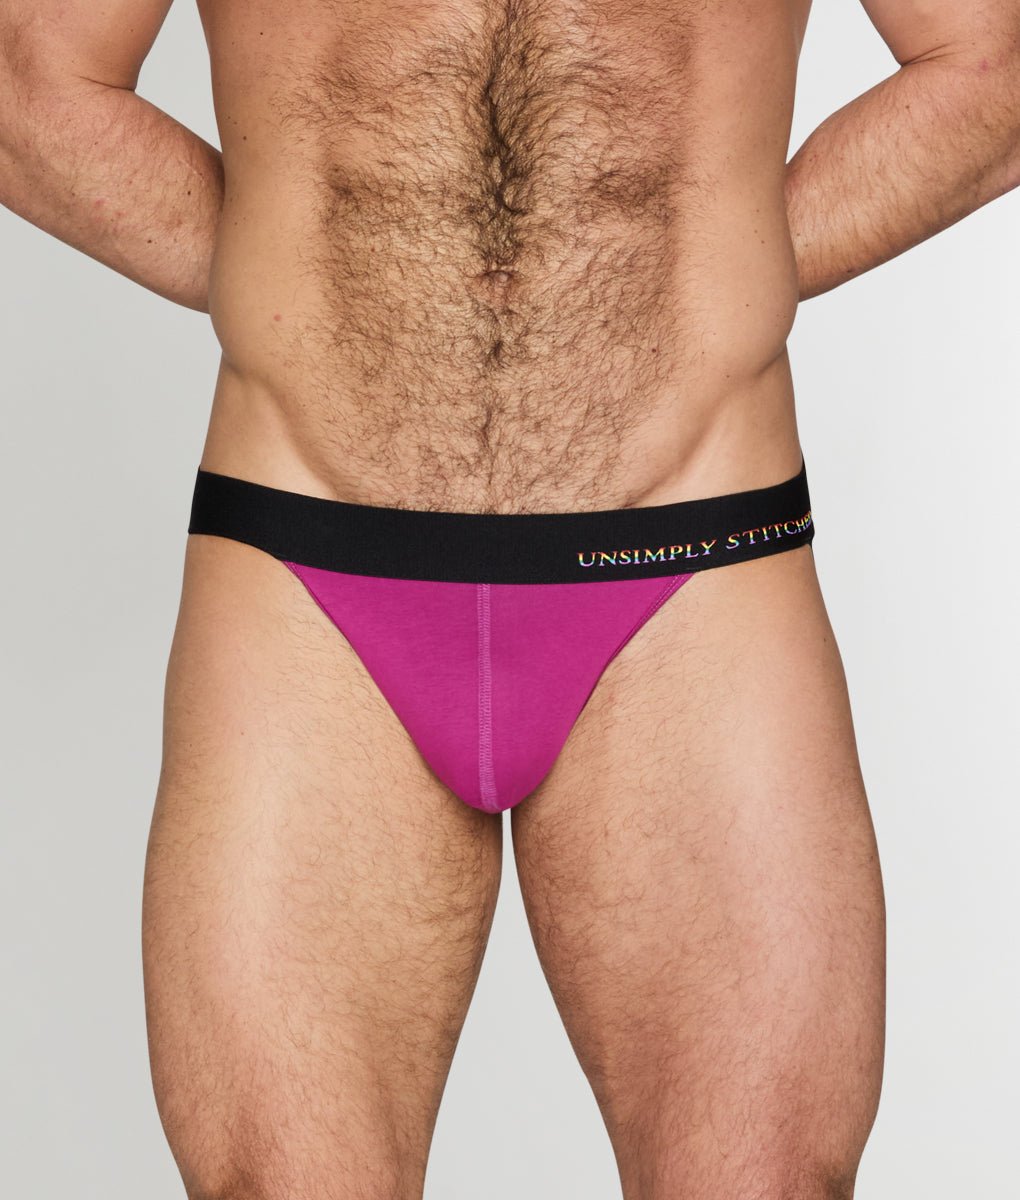 Unsimply Stitched Pride Solid Jockstrap by Unsimply Stitched